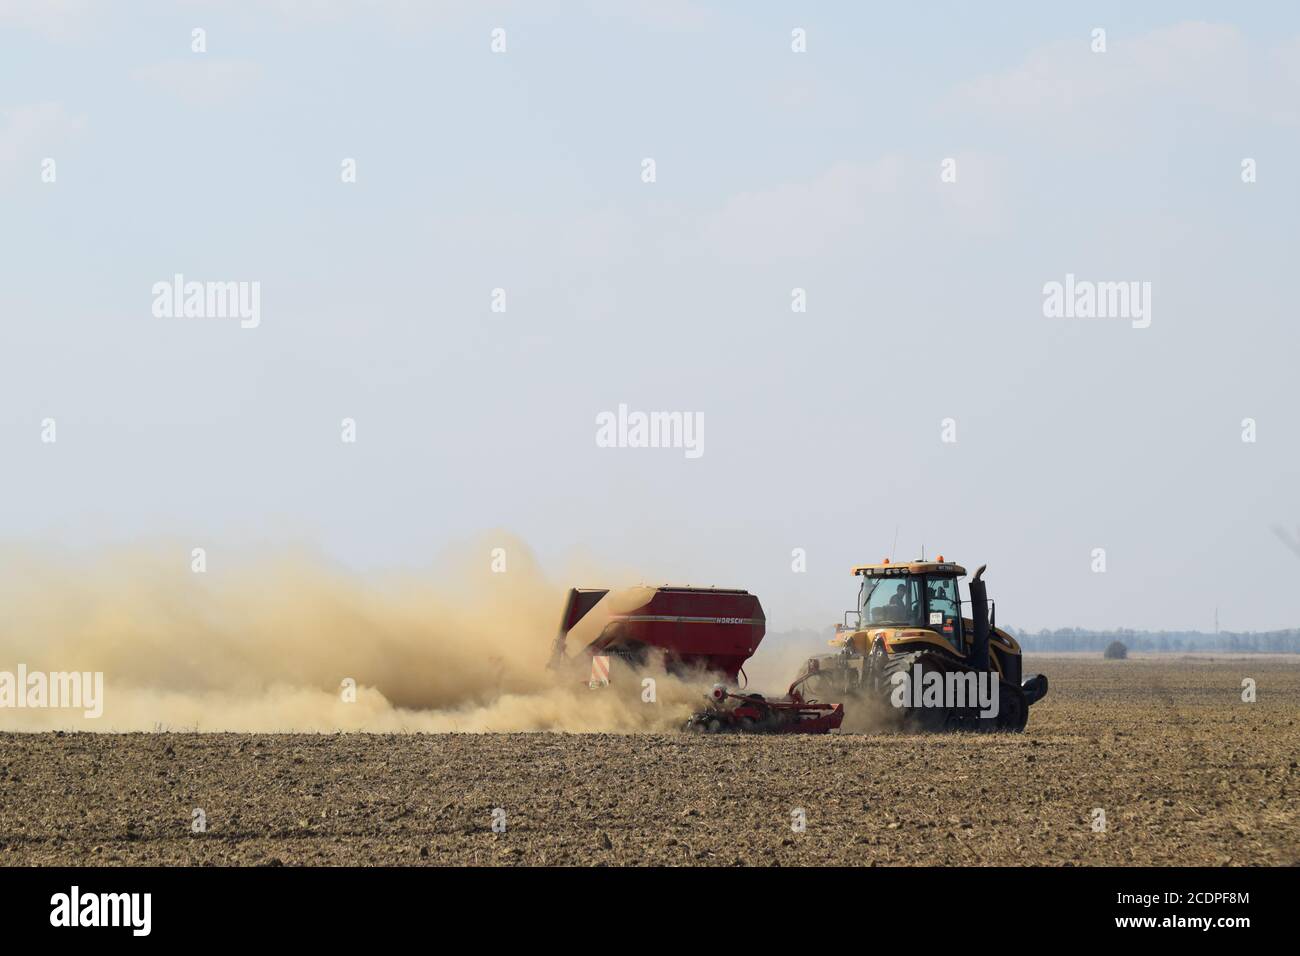 Tractor rides on the field and makes the fertilizer into the soil. Fertilizers after plowing the field. Stock Photo